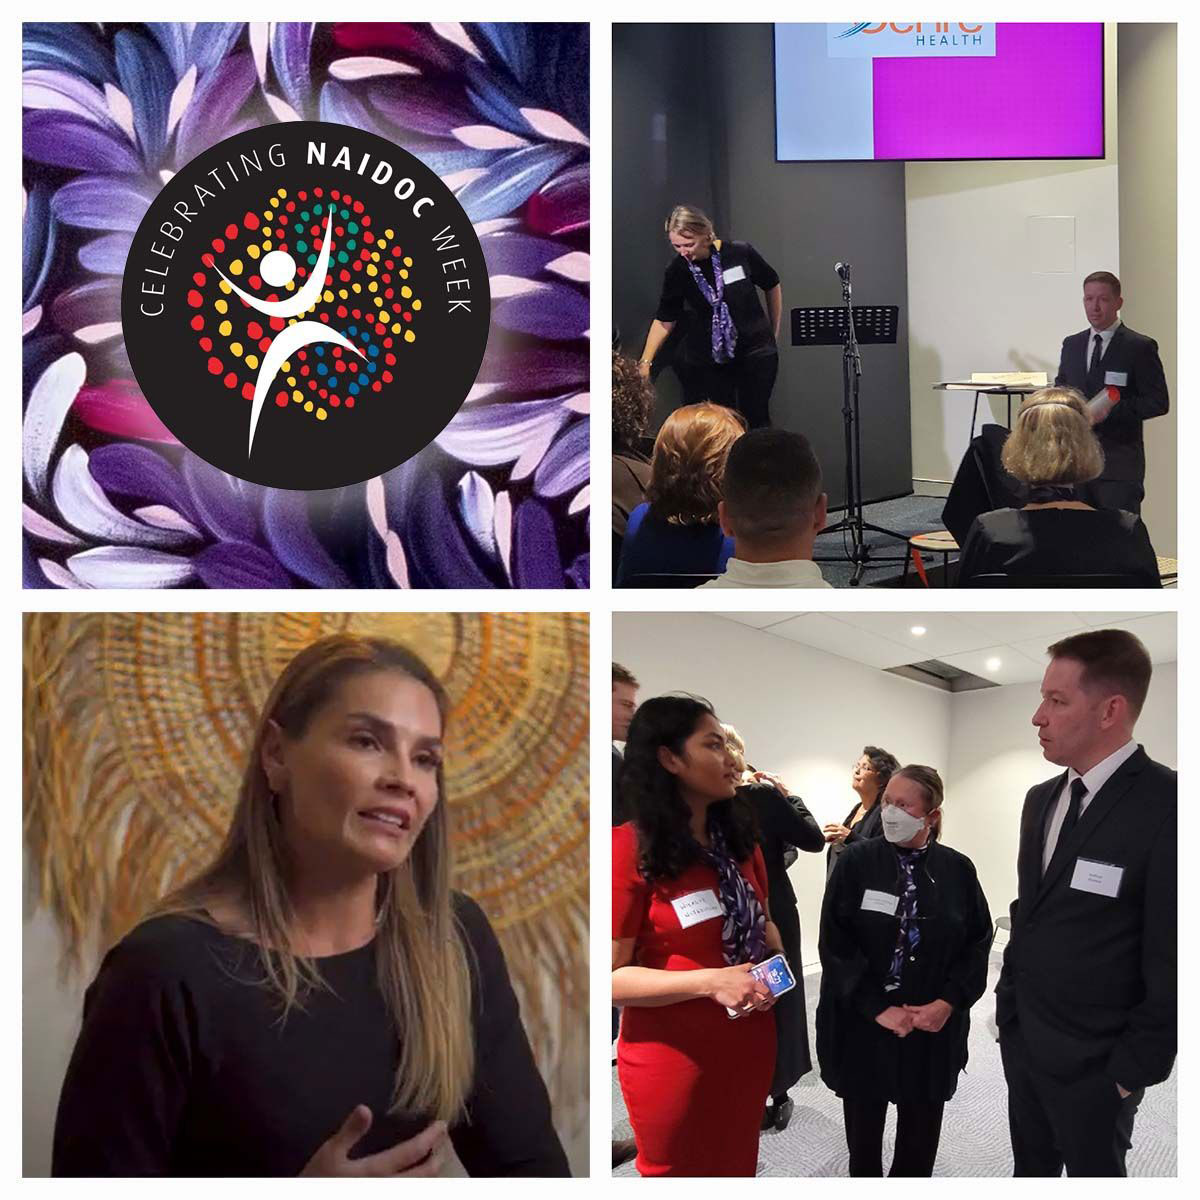 Photos of the AFMW event heald during NAIDOC week